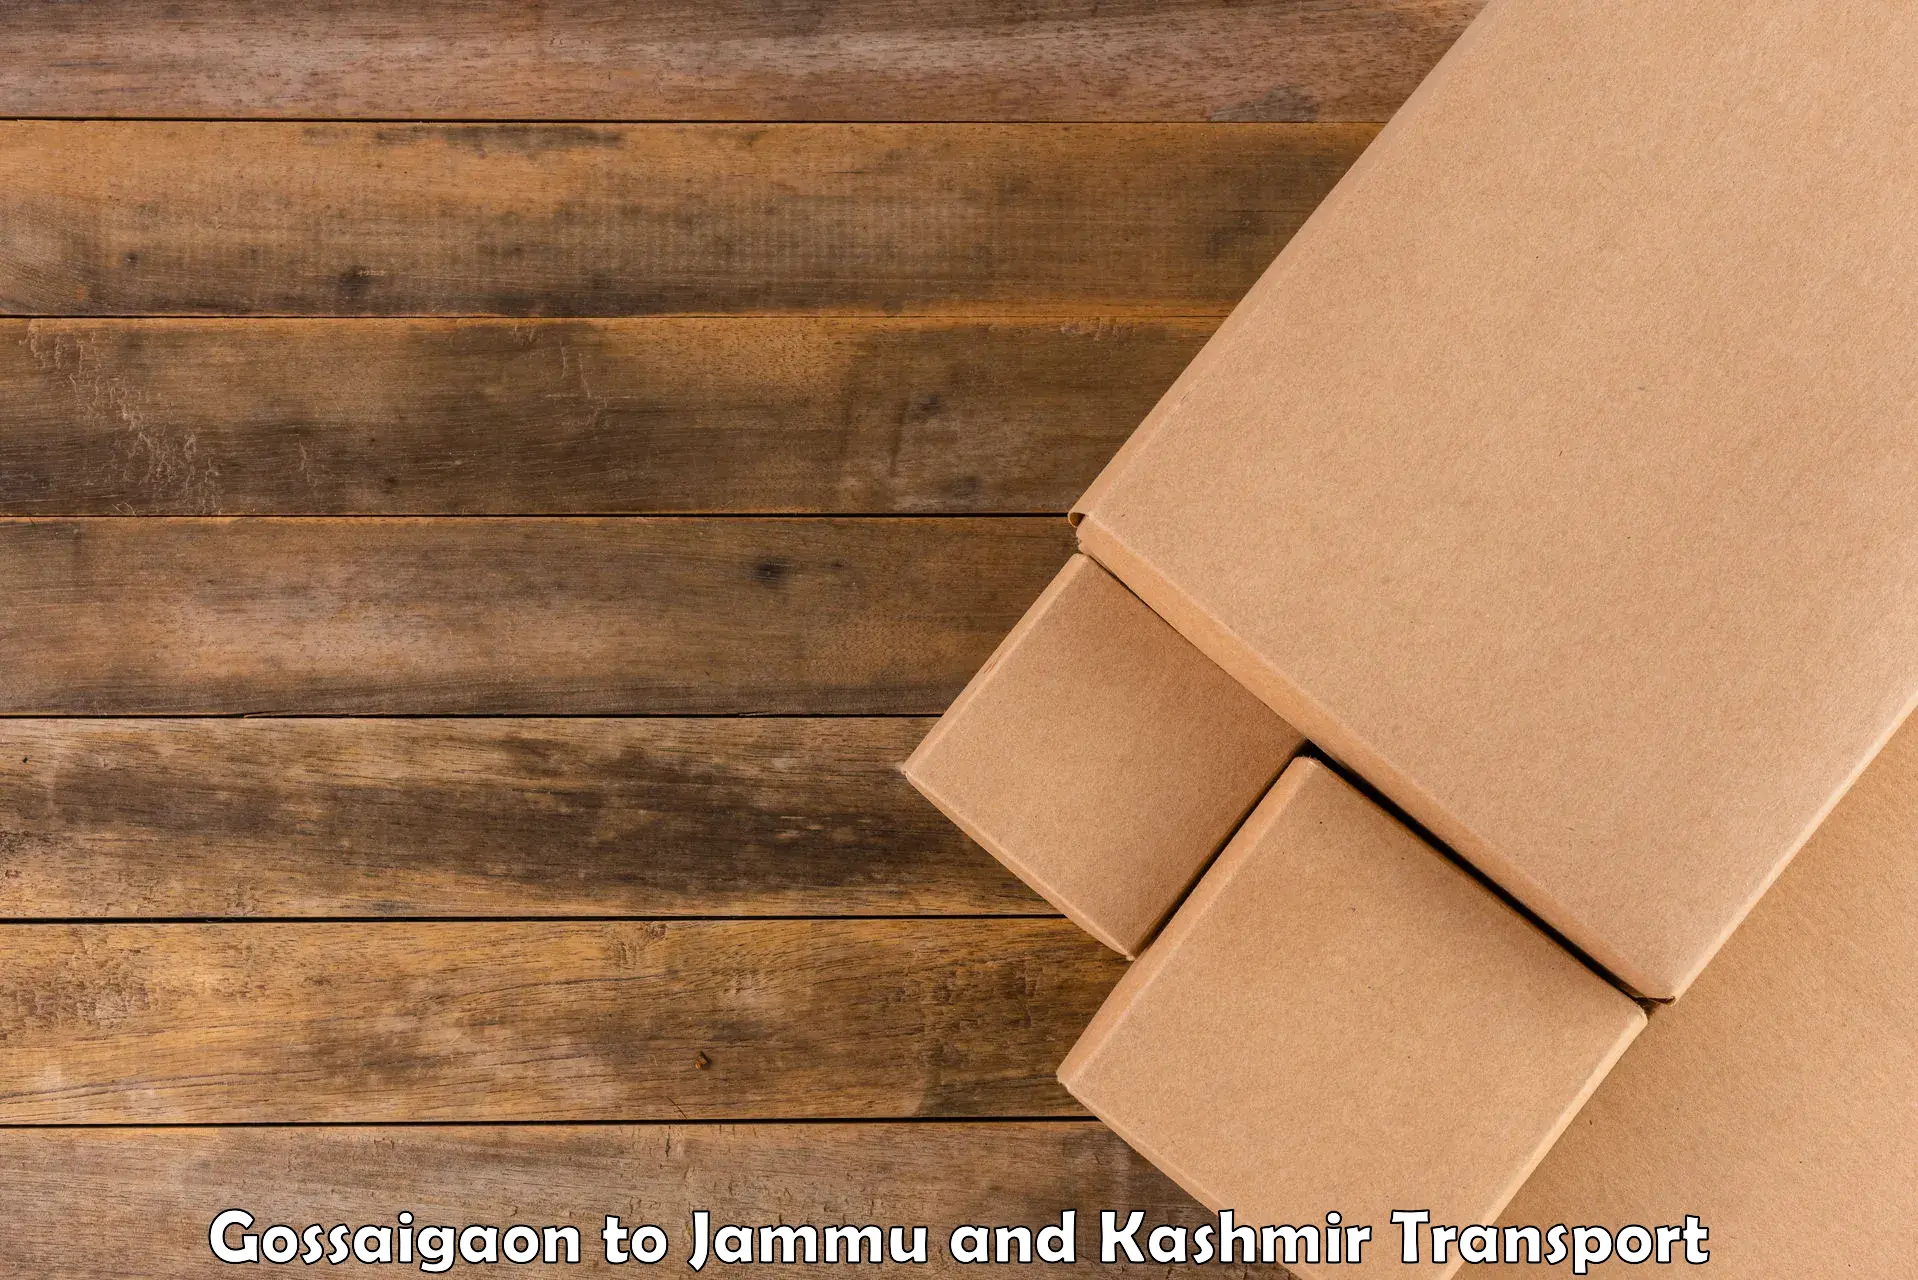 Truck transport companies in India Gossaigaon to Jammu and Kashmir